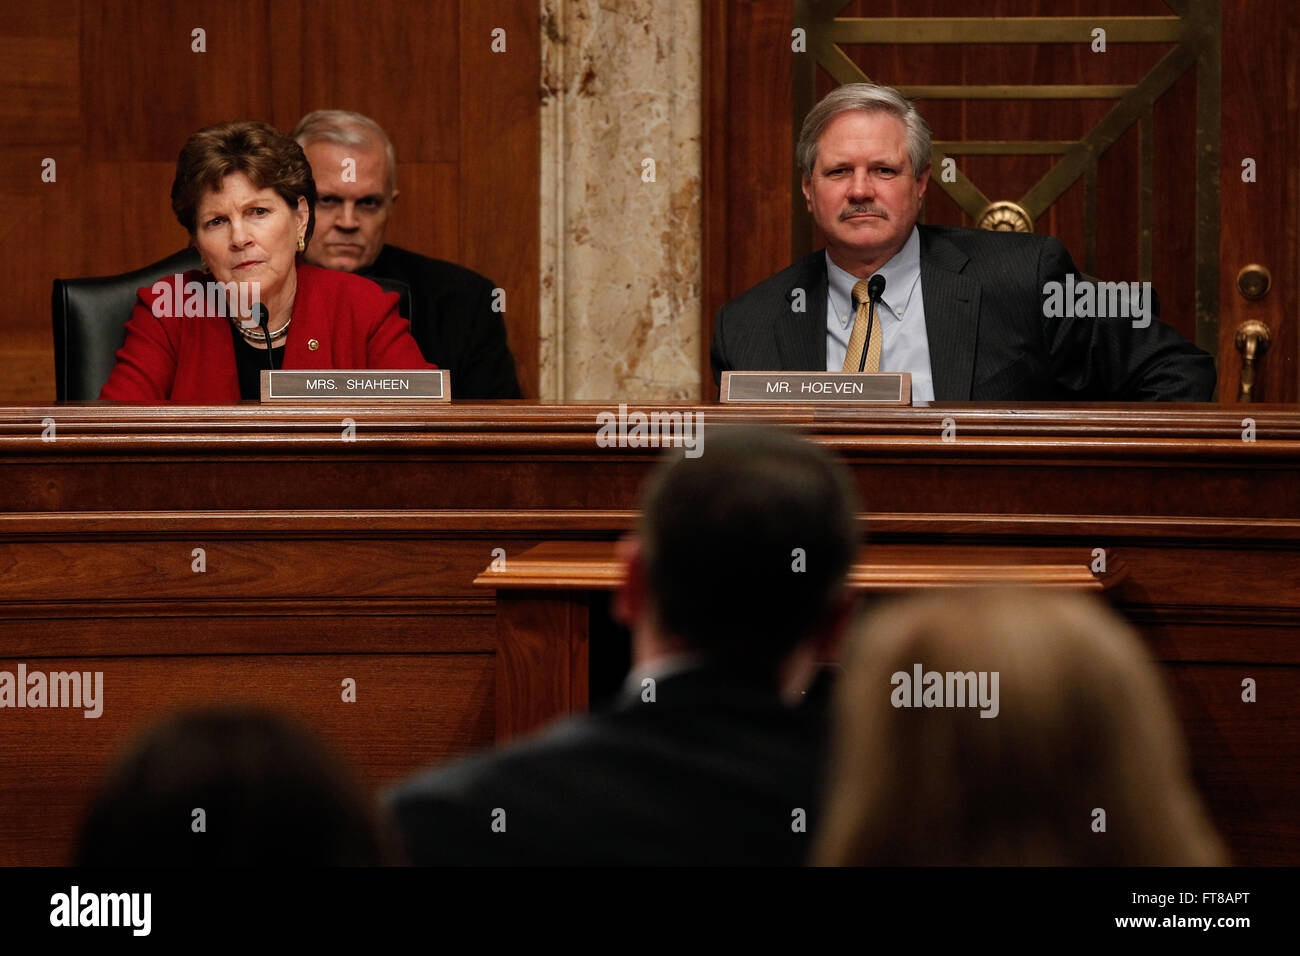 Chairman John Hoeven, right, and Ranking Member Jeanne Shaheen listen as Deputy Commissioner of U.S. Customs and Border Protection Kevin McAleenan testifies before the Senate Appropriations Subcommittee on Homeland Security in Washington, D.C., March 8, 2016. (U.S. Customs and Border Protection Photo by Glenn Fawcett) Stock Photo